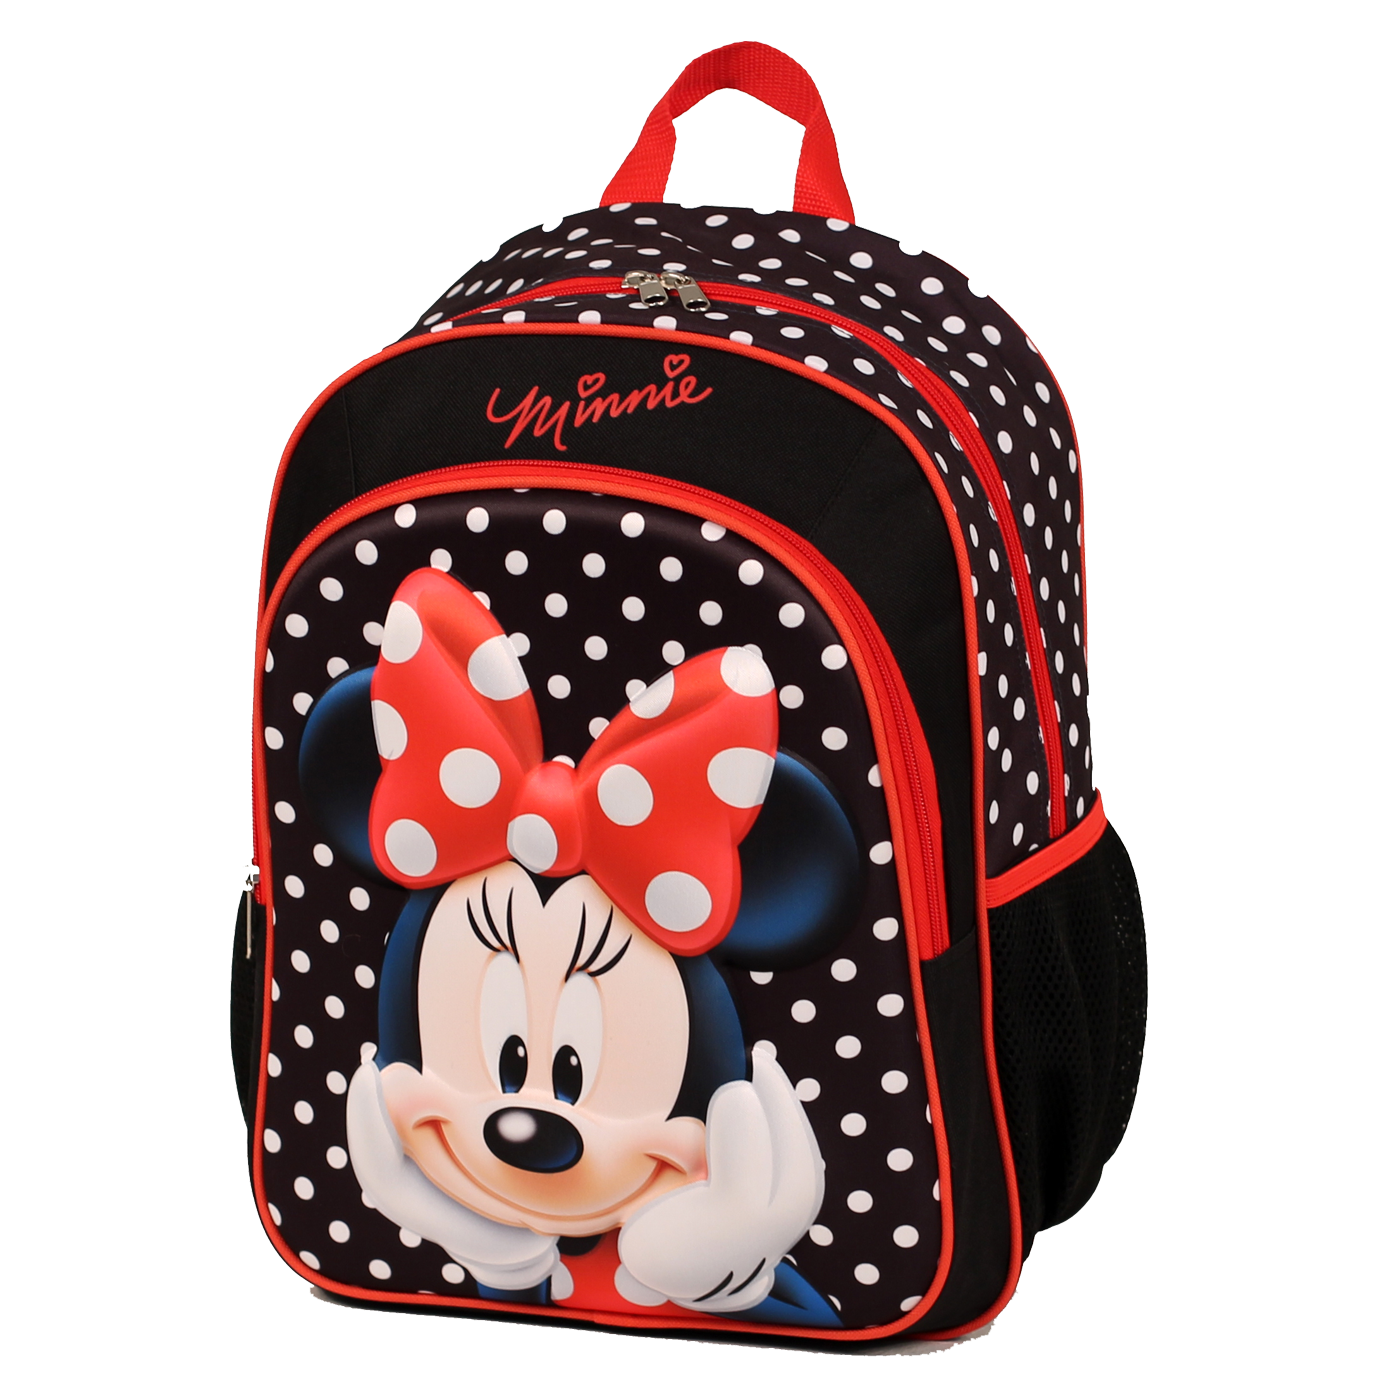 Disney Backpack Minnie Mouse 3D